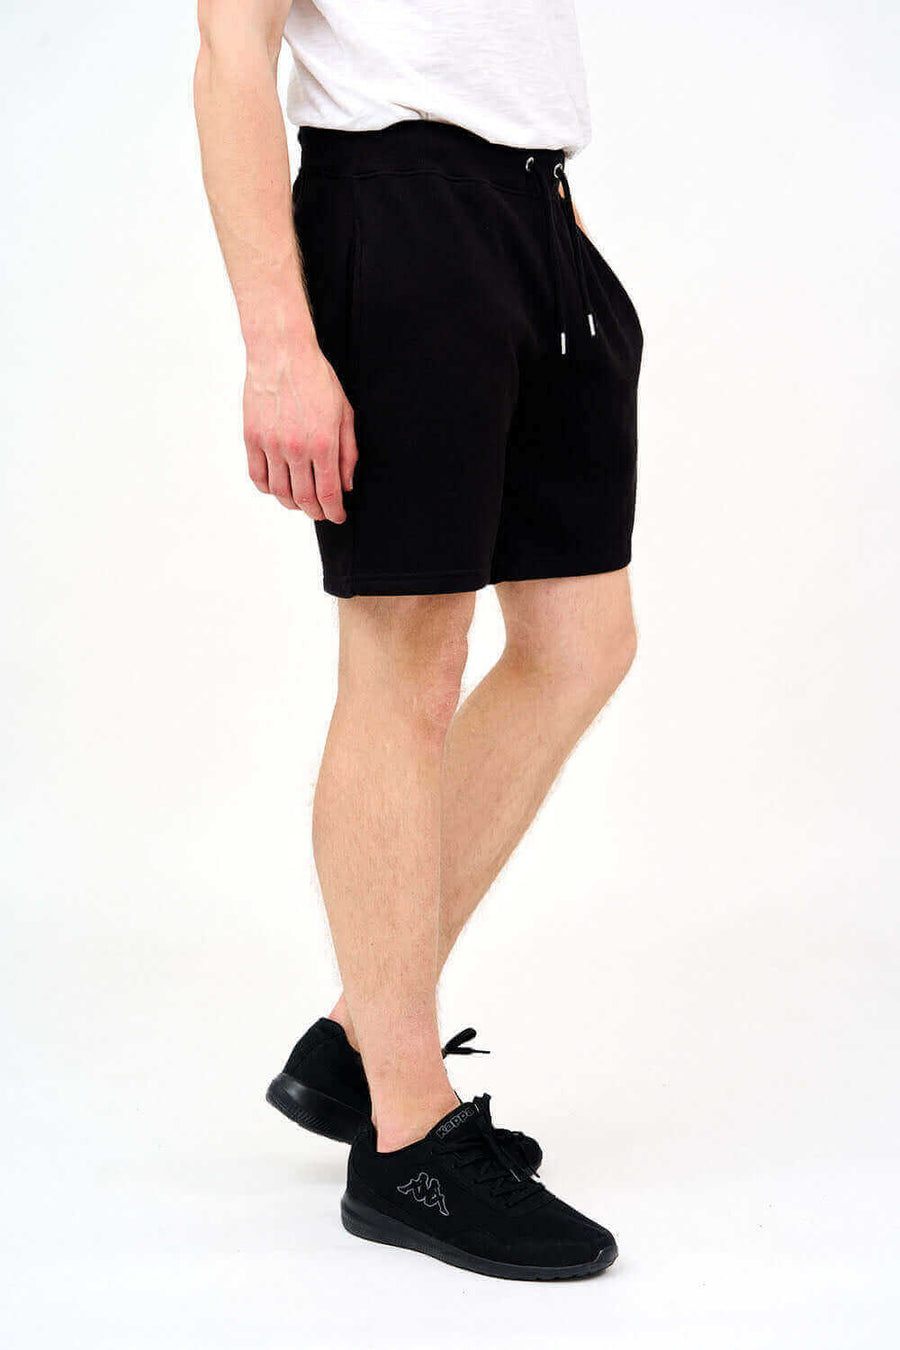 Right Side View of Flexible Men's Gym Shorts in Black for Your Active Lifestyle